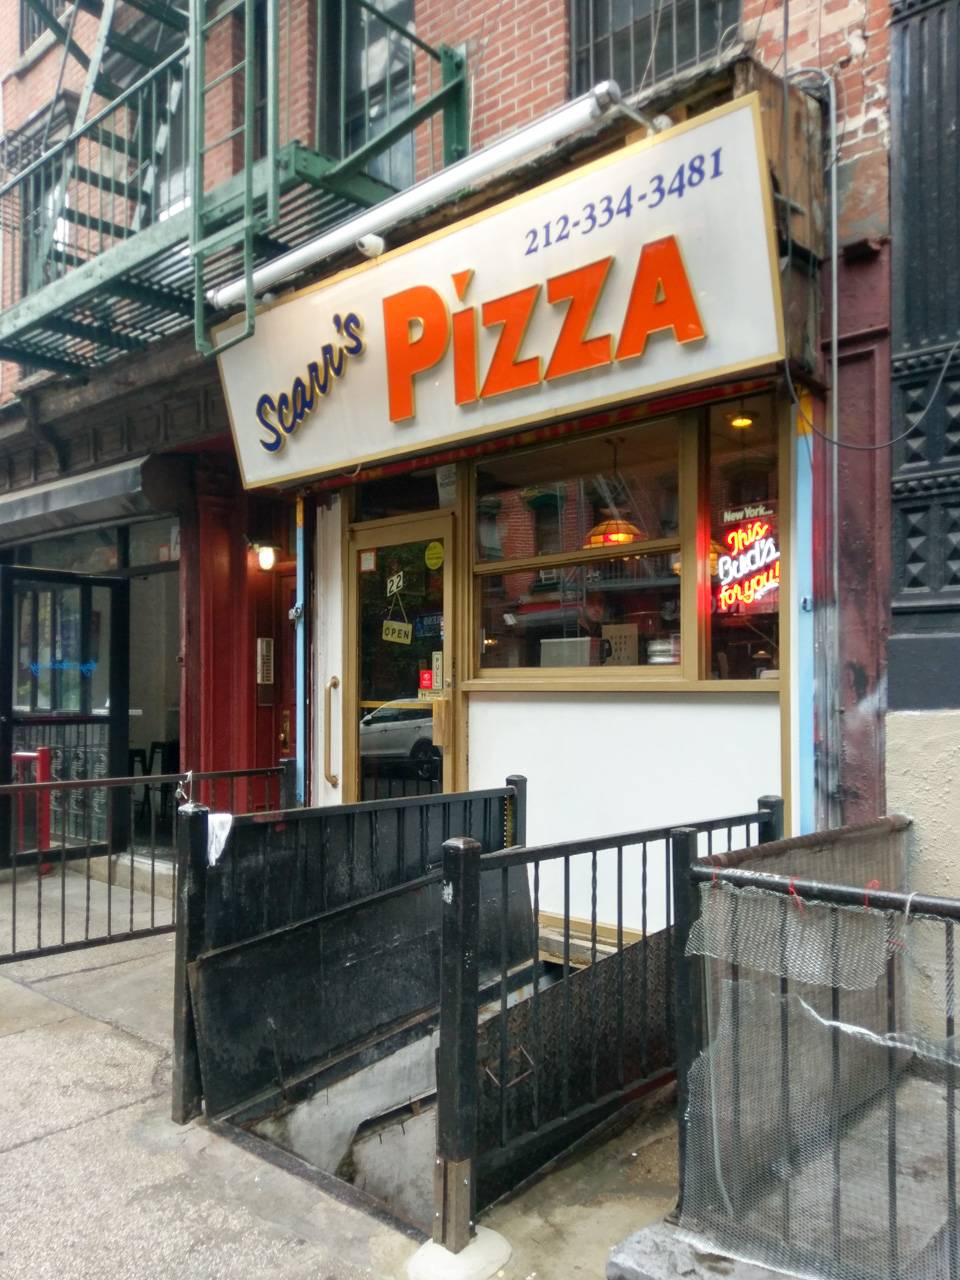 Scarrs Pizza | restaurant | 22 Orchard St, New York, NY 10002, USA | 2123343481 OR +1 212-334-3481